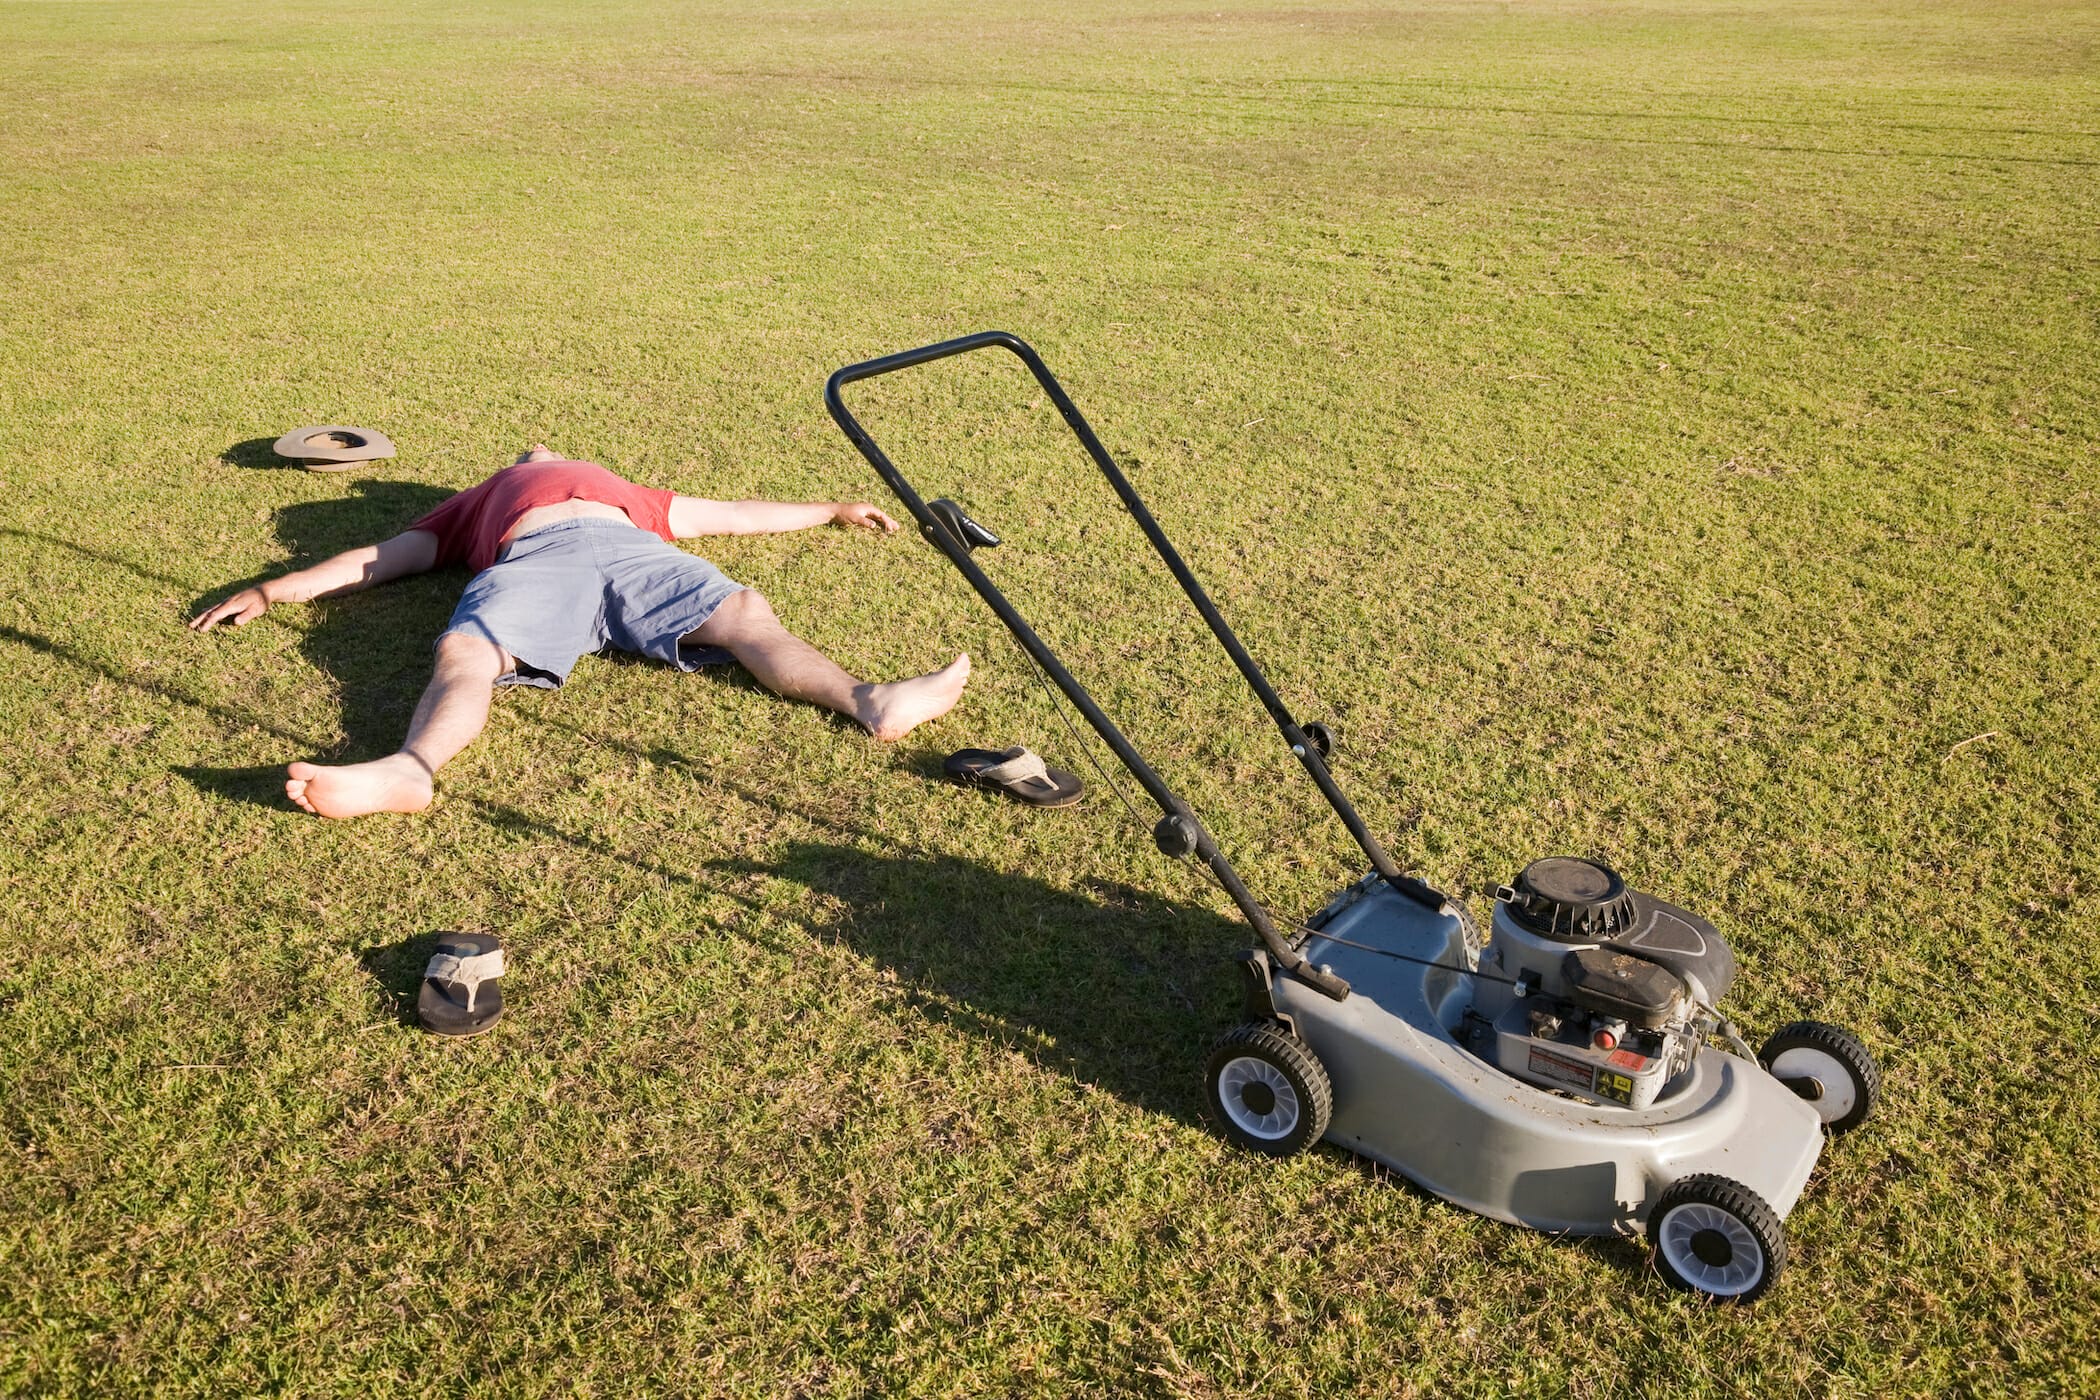 An exhausted man lying on the ground collapsed after mowing a huge lawn.